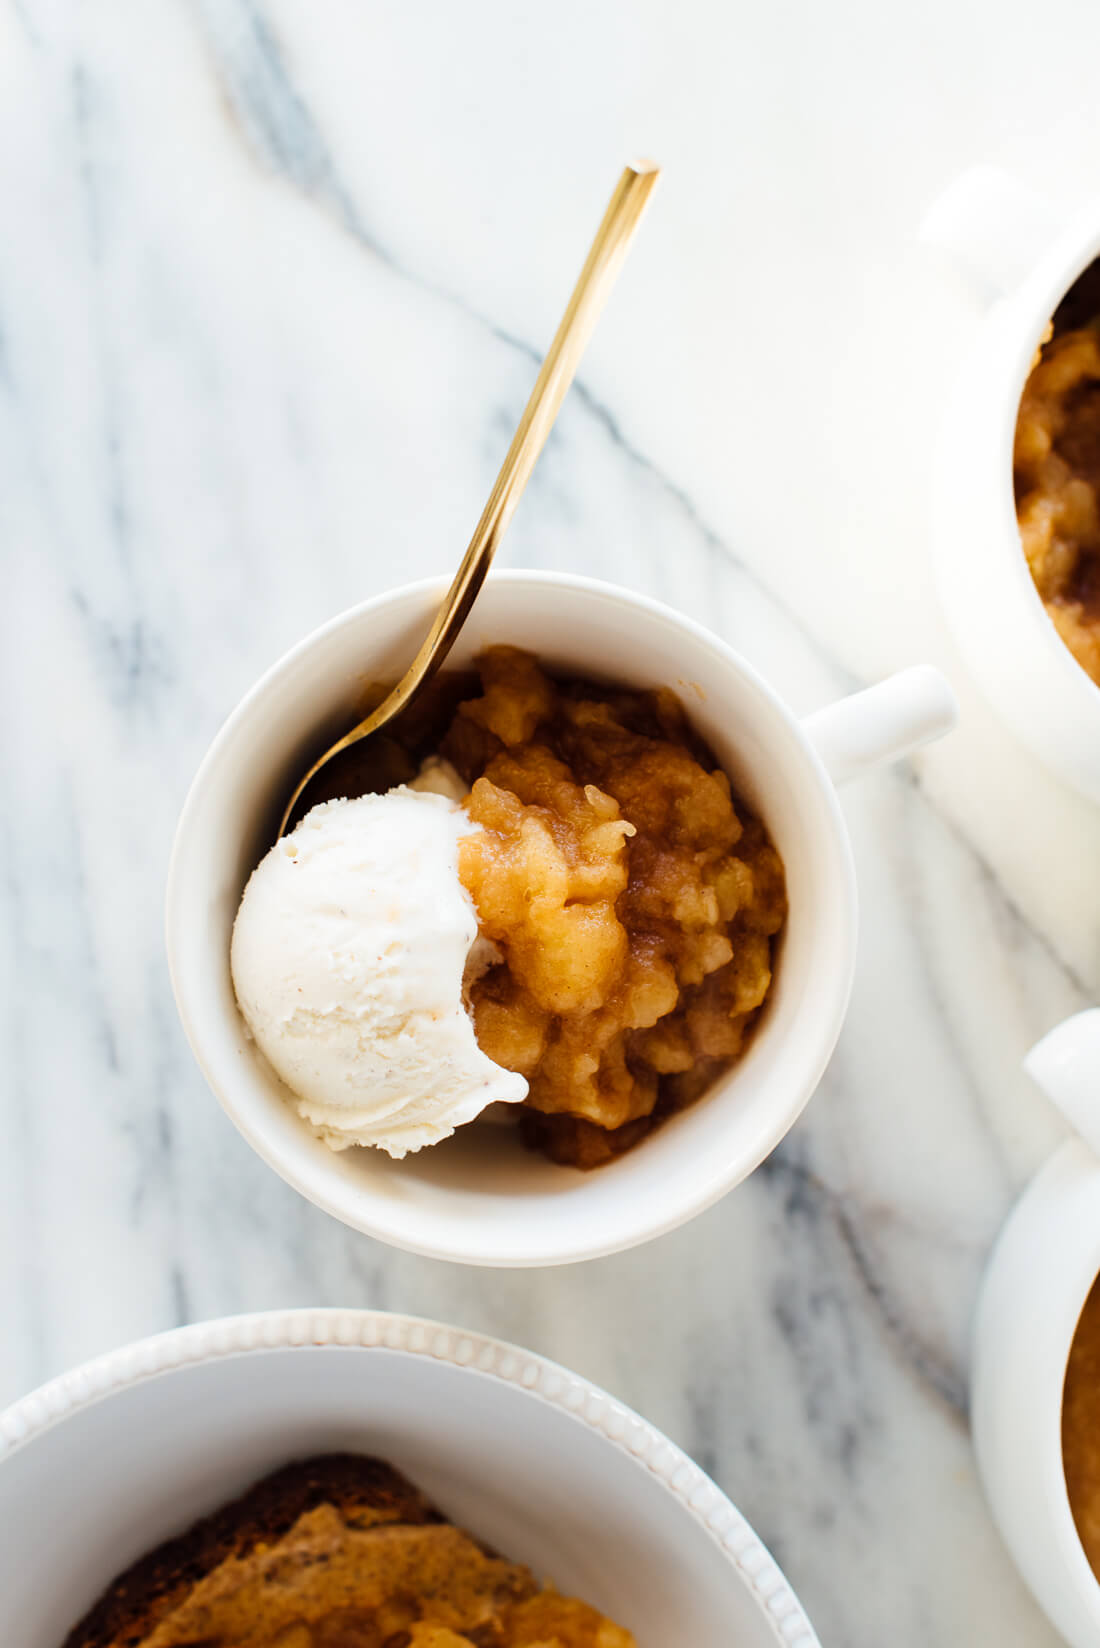 Homemade applesauce with ice cream is an easy and delicious #dessert!